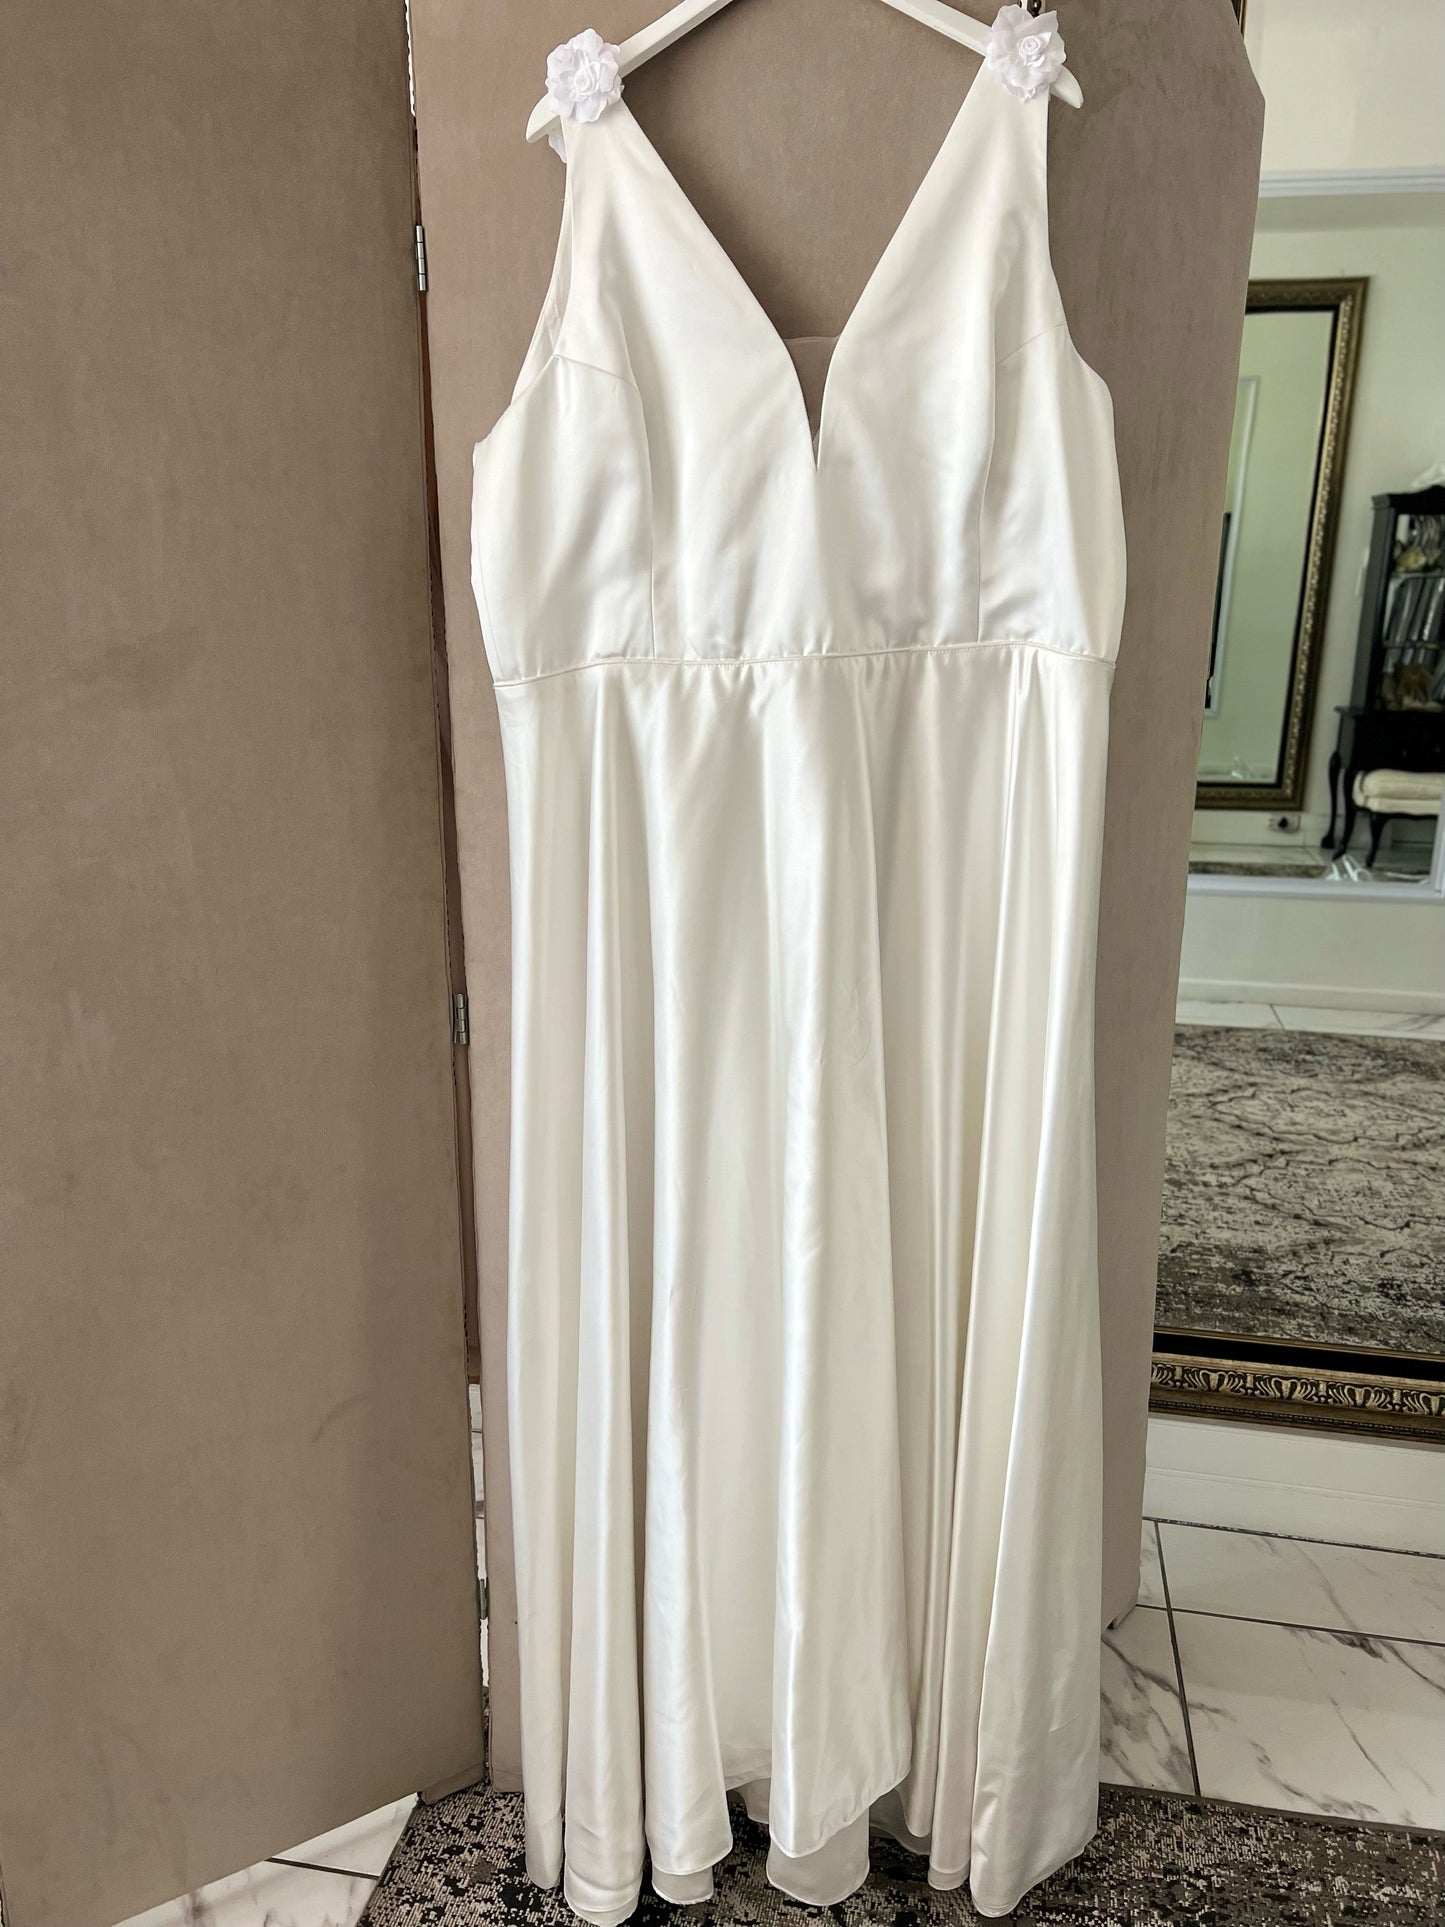 Code 2137: Milk satin with beaded lace back, Size 18/20